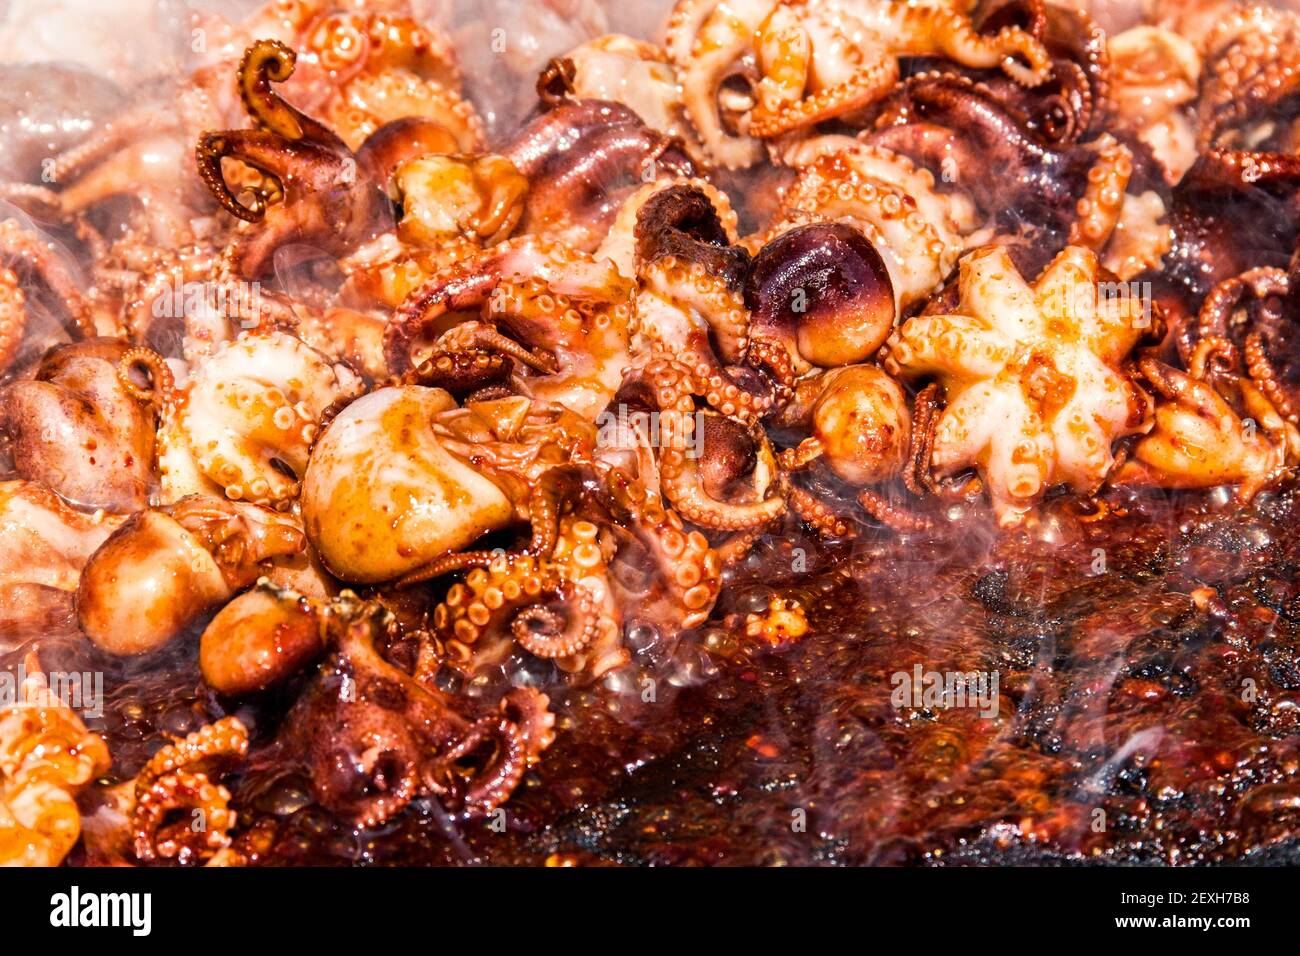 Korean style grilled baby octopus Stock Photo